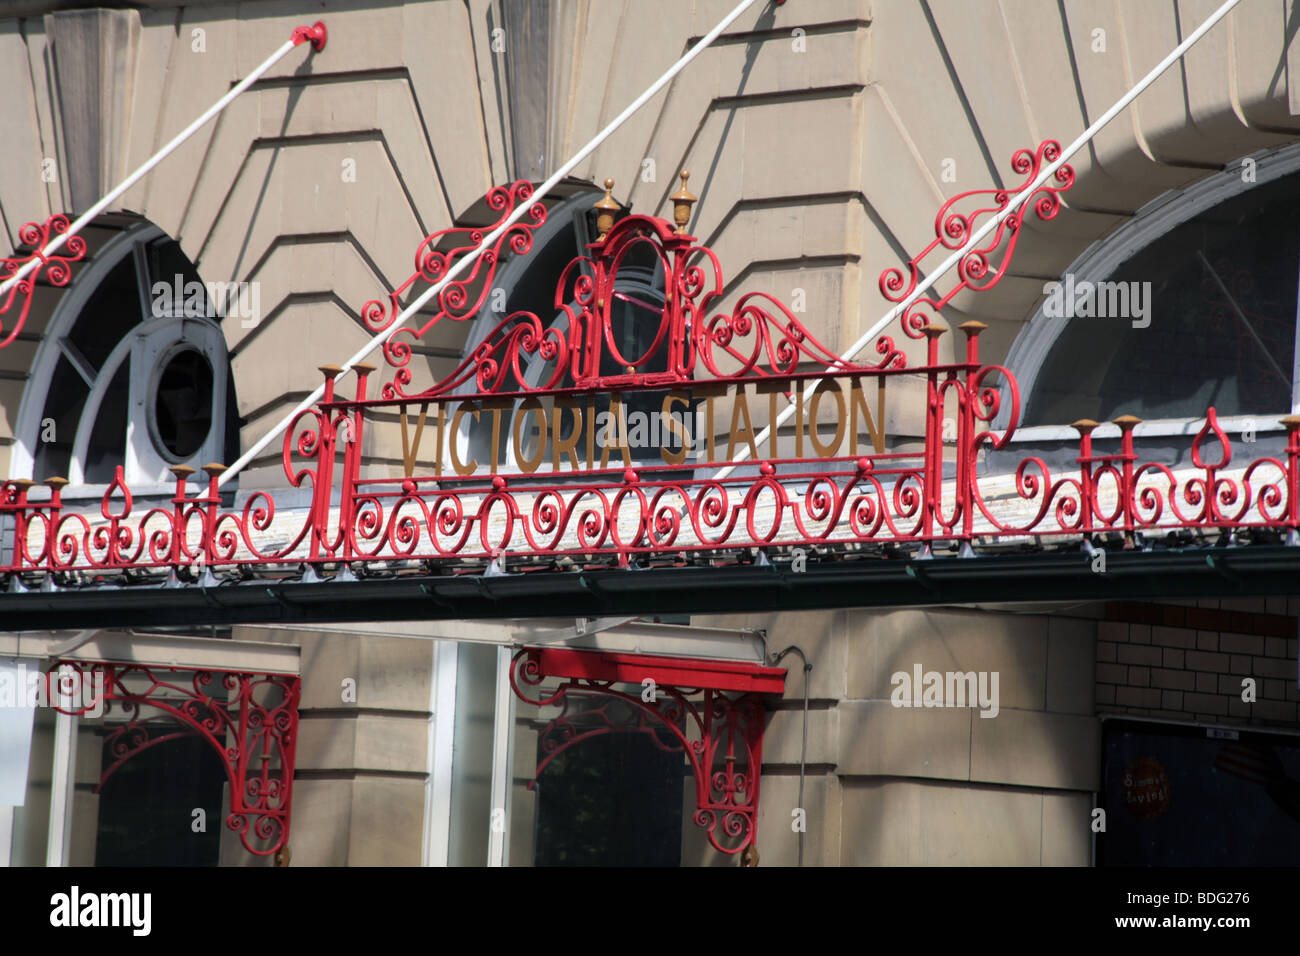 Cast Iron ornate destination signs on the canopy of Manchester Victoria Station England Stock Photo